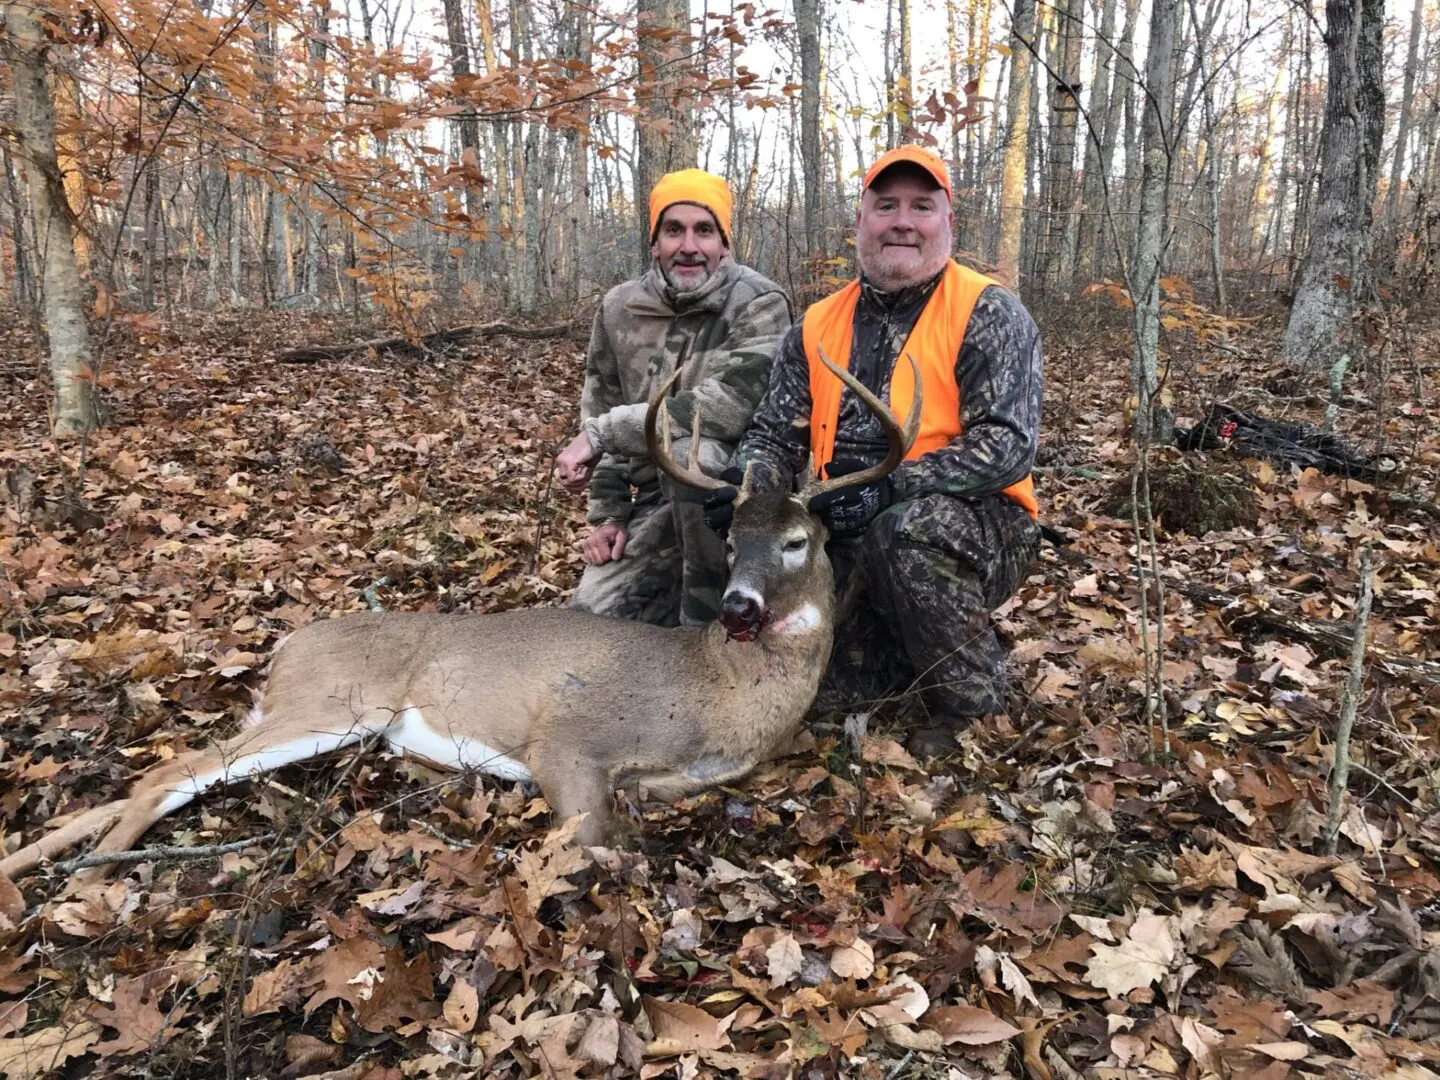 Two Men Standing Behind and Holding a Dead Deer